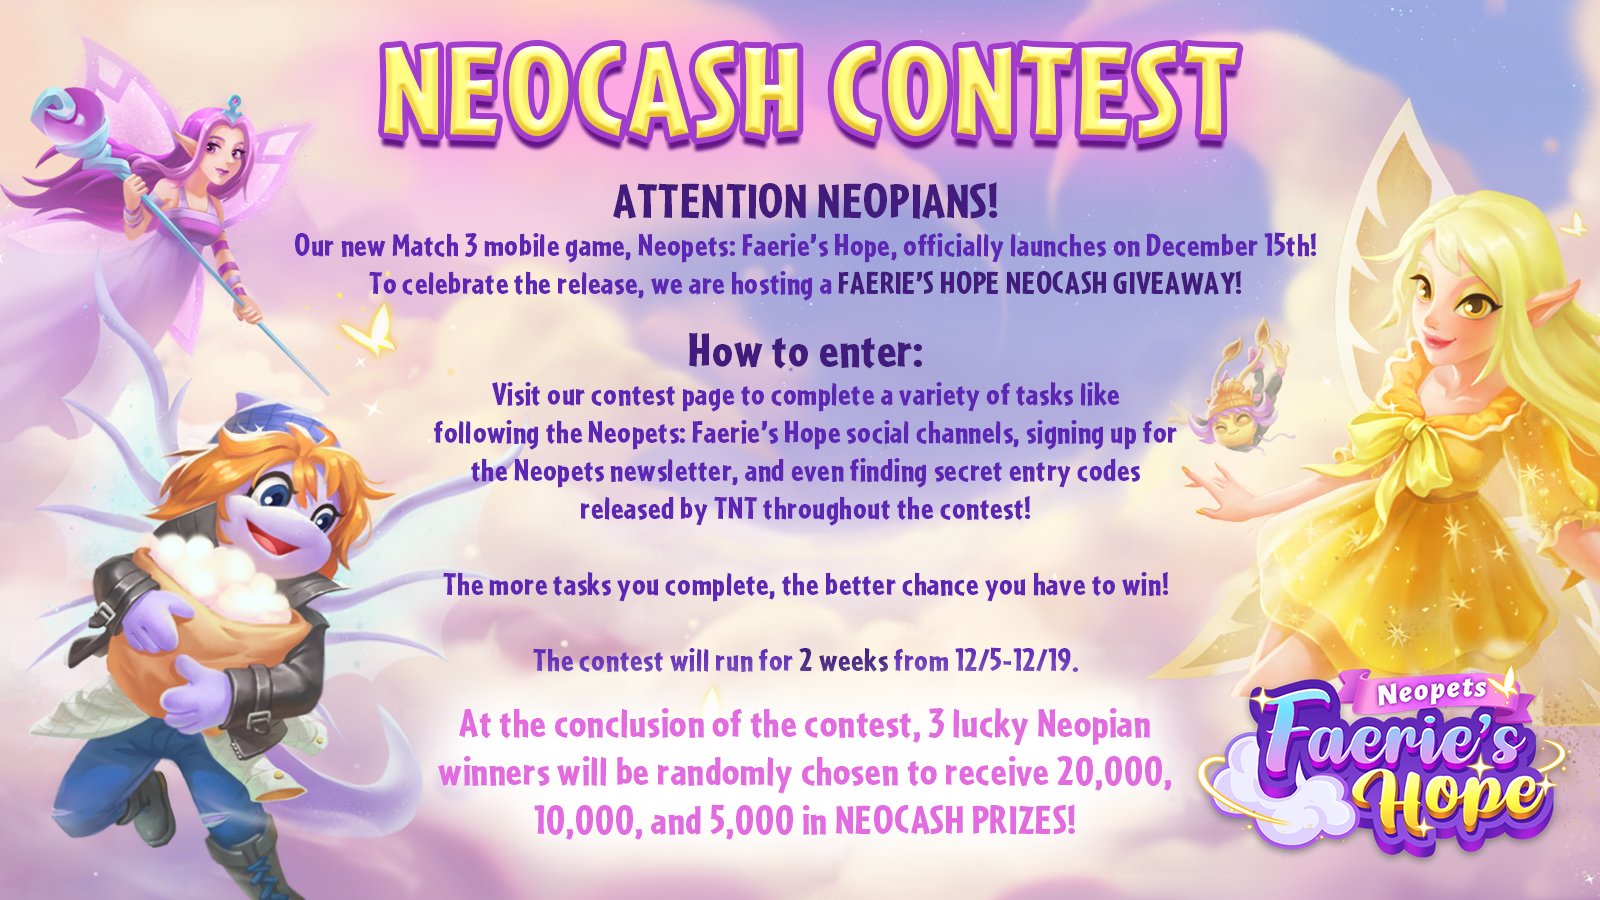 🚨ATTENTION NEOPIANS! 🚨

Our new Match 3 mobile game, Neopets: Faerie’s Hope, officially launches on December 15th! 🧚

To celebrate the release, we are hosting a FAERIE’S HOPE NEOCASH GIVEAWAY! 🎉

How to enter:

Visit our contest page to complete a variety of tasks like following the Neopets: Faerie’s Hope social channels, signing up for the Neopets newsletter, and even finding 👀 secret entry codes ⁉️ released by TNT throughout the contest! ✨

The more tasks you complete, the better chance you have to win! 💰

The contest will run for 2 weeks from 12/5-12/19! 📅

💰💰💰 At the conclusion of the contest, 3 lucky Neopian winners will be randomly chosen to receive 20,000, 10,000, and 5,000 in NEOCASH PRIZES! 💰💰💰

Visit https://gleam.io/competitions/xkQ5W-neopets-faeries-hope-neocash-giveaway to enter and for all the rules! 🧚
